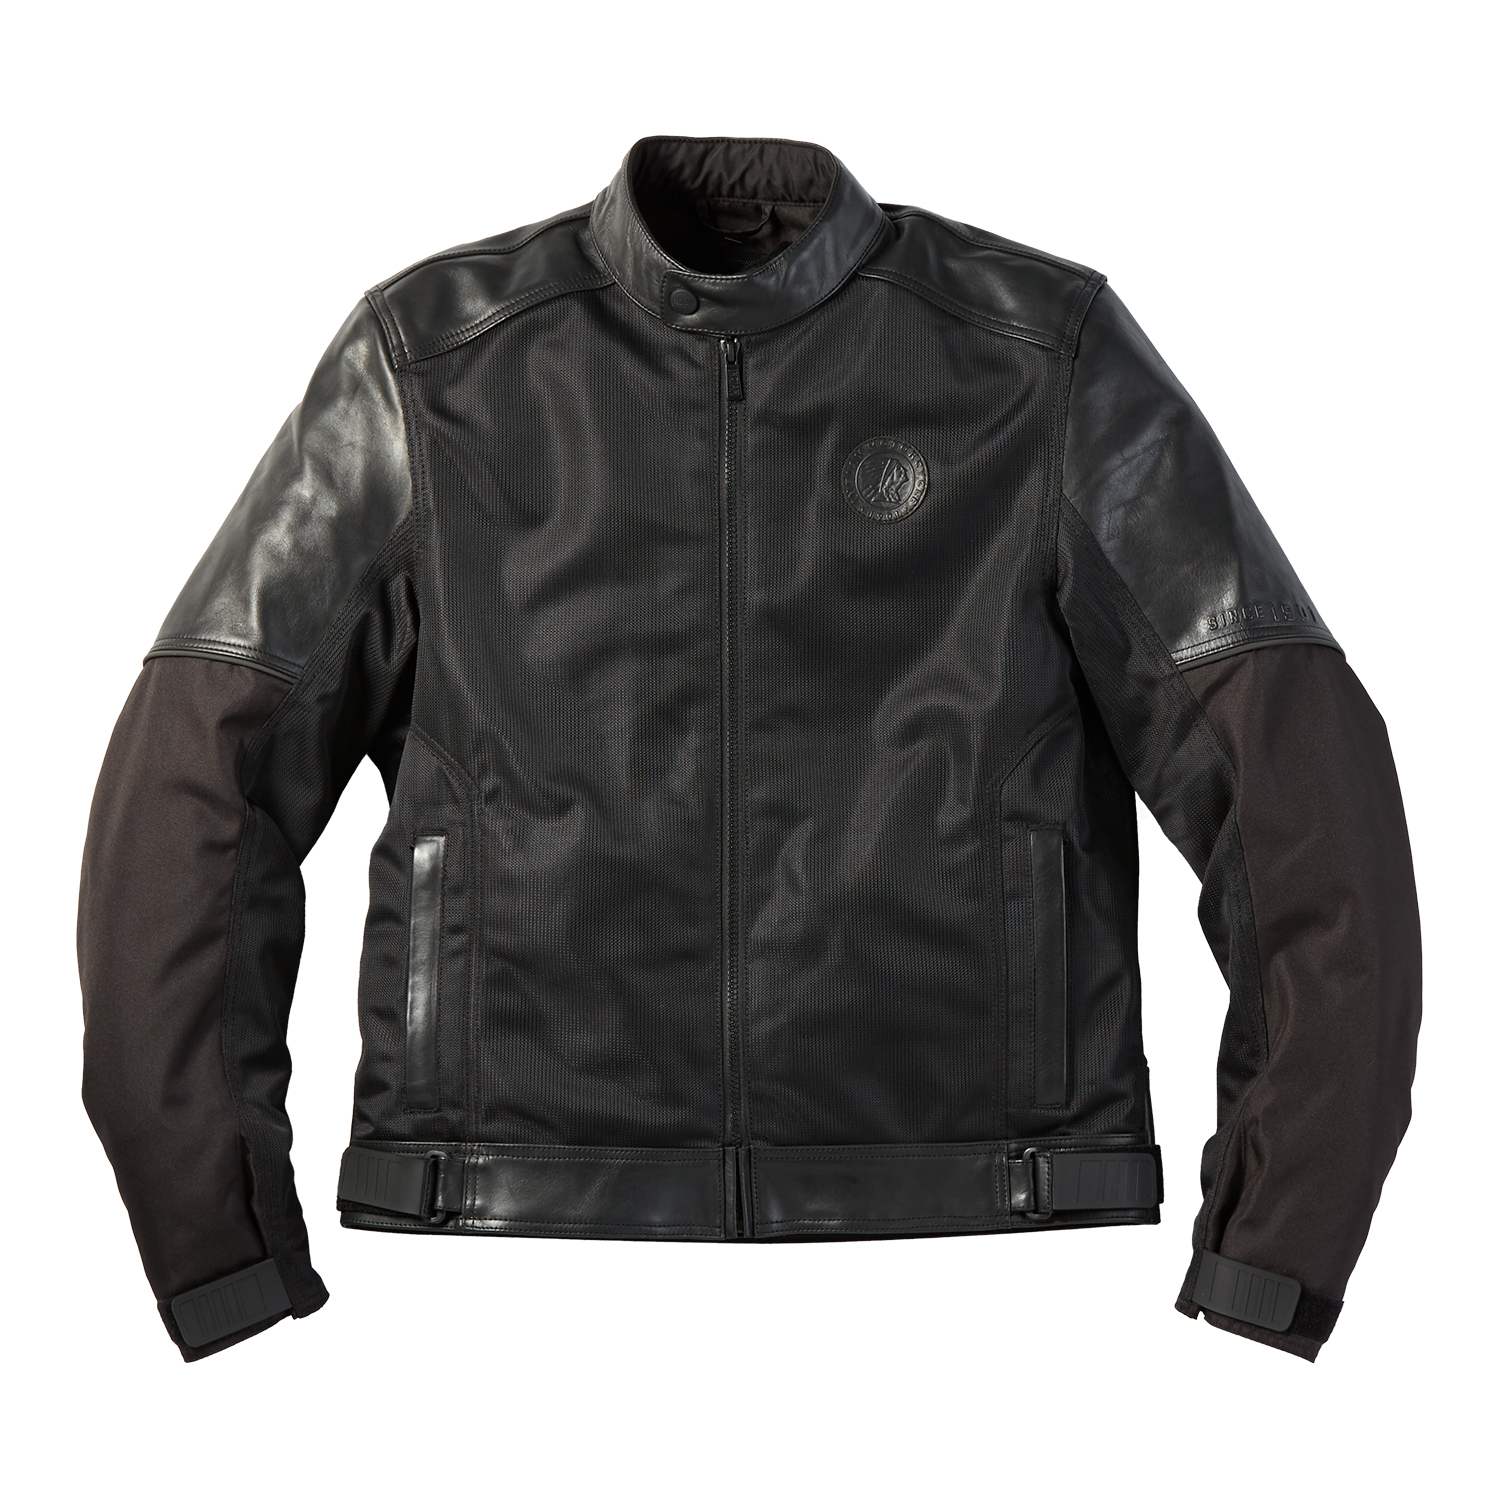 Indian Motorcycle Men's Mesh Lightweight 2 Riding Jacket with Removable Liner Black